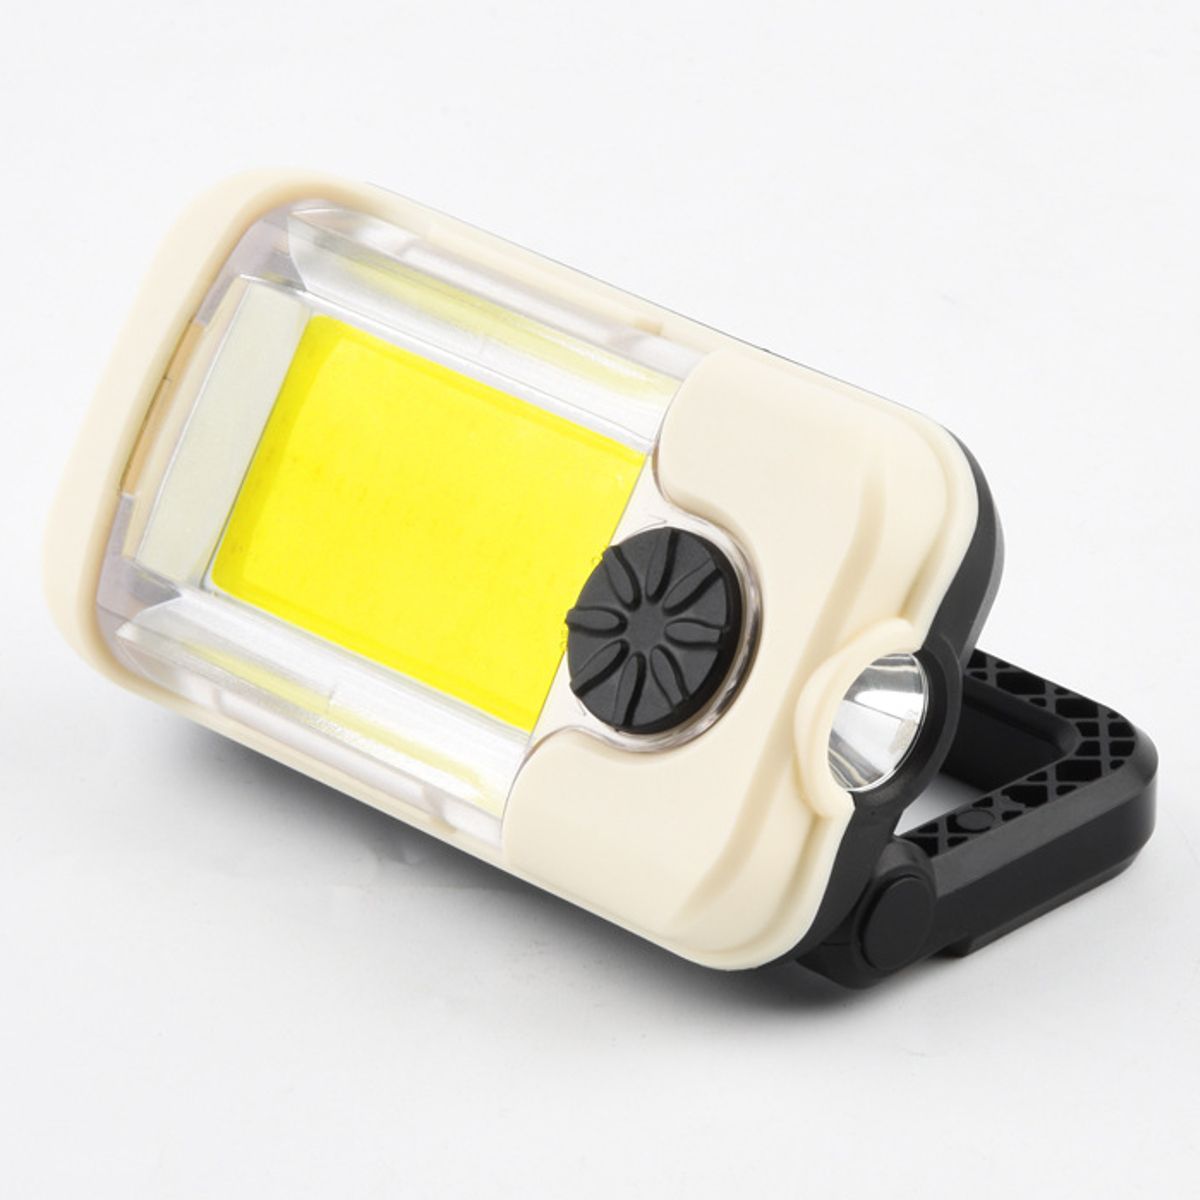 Rechargeable-COB-LED-Work-Light-Portable-Magnetic-Hook-Clip-Waterproof-Glare-Flashlight-for-Camping-1712961